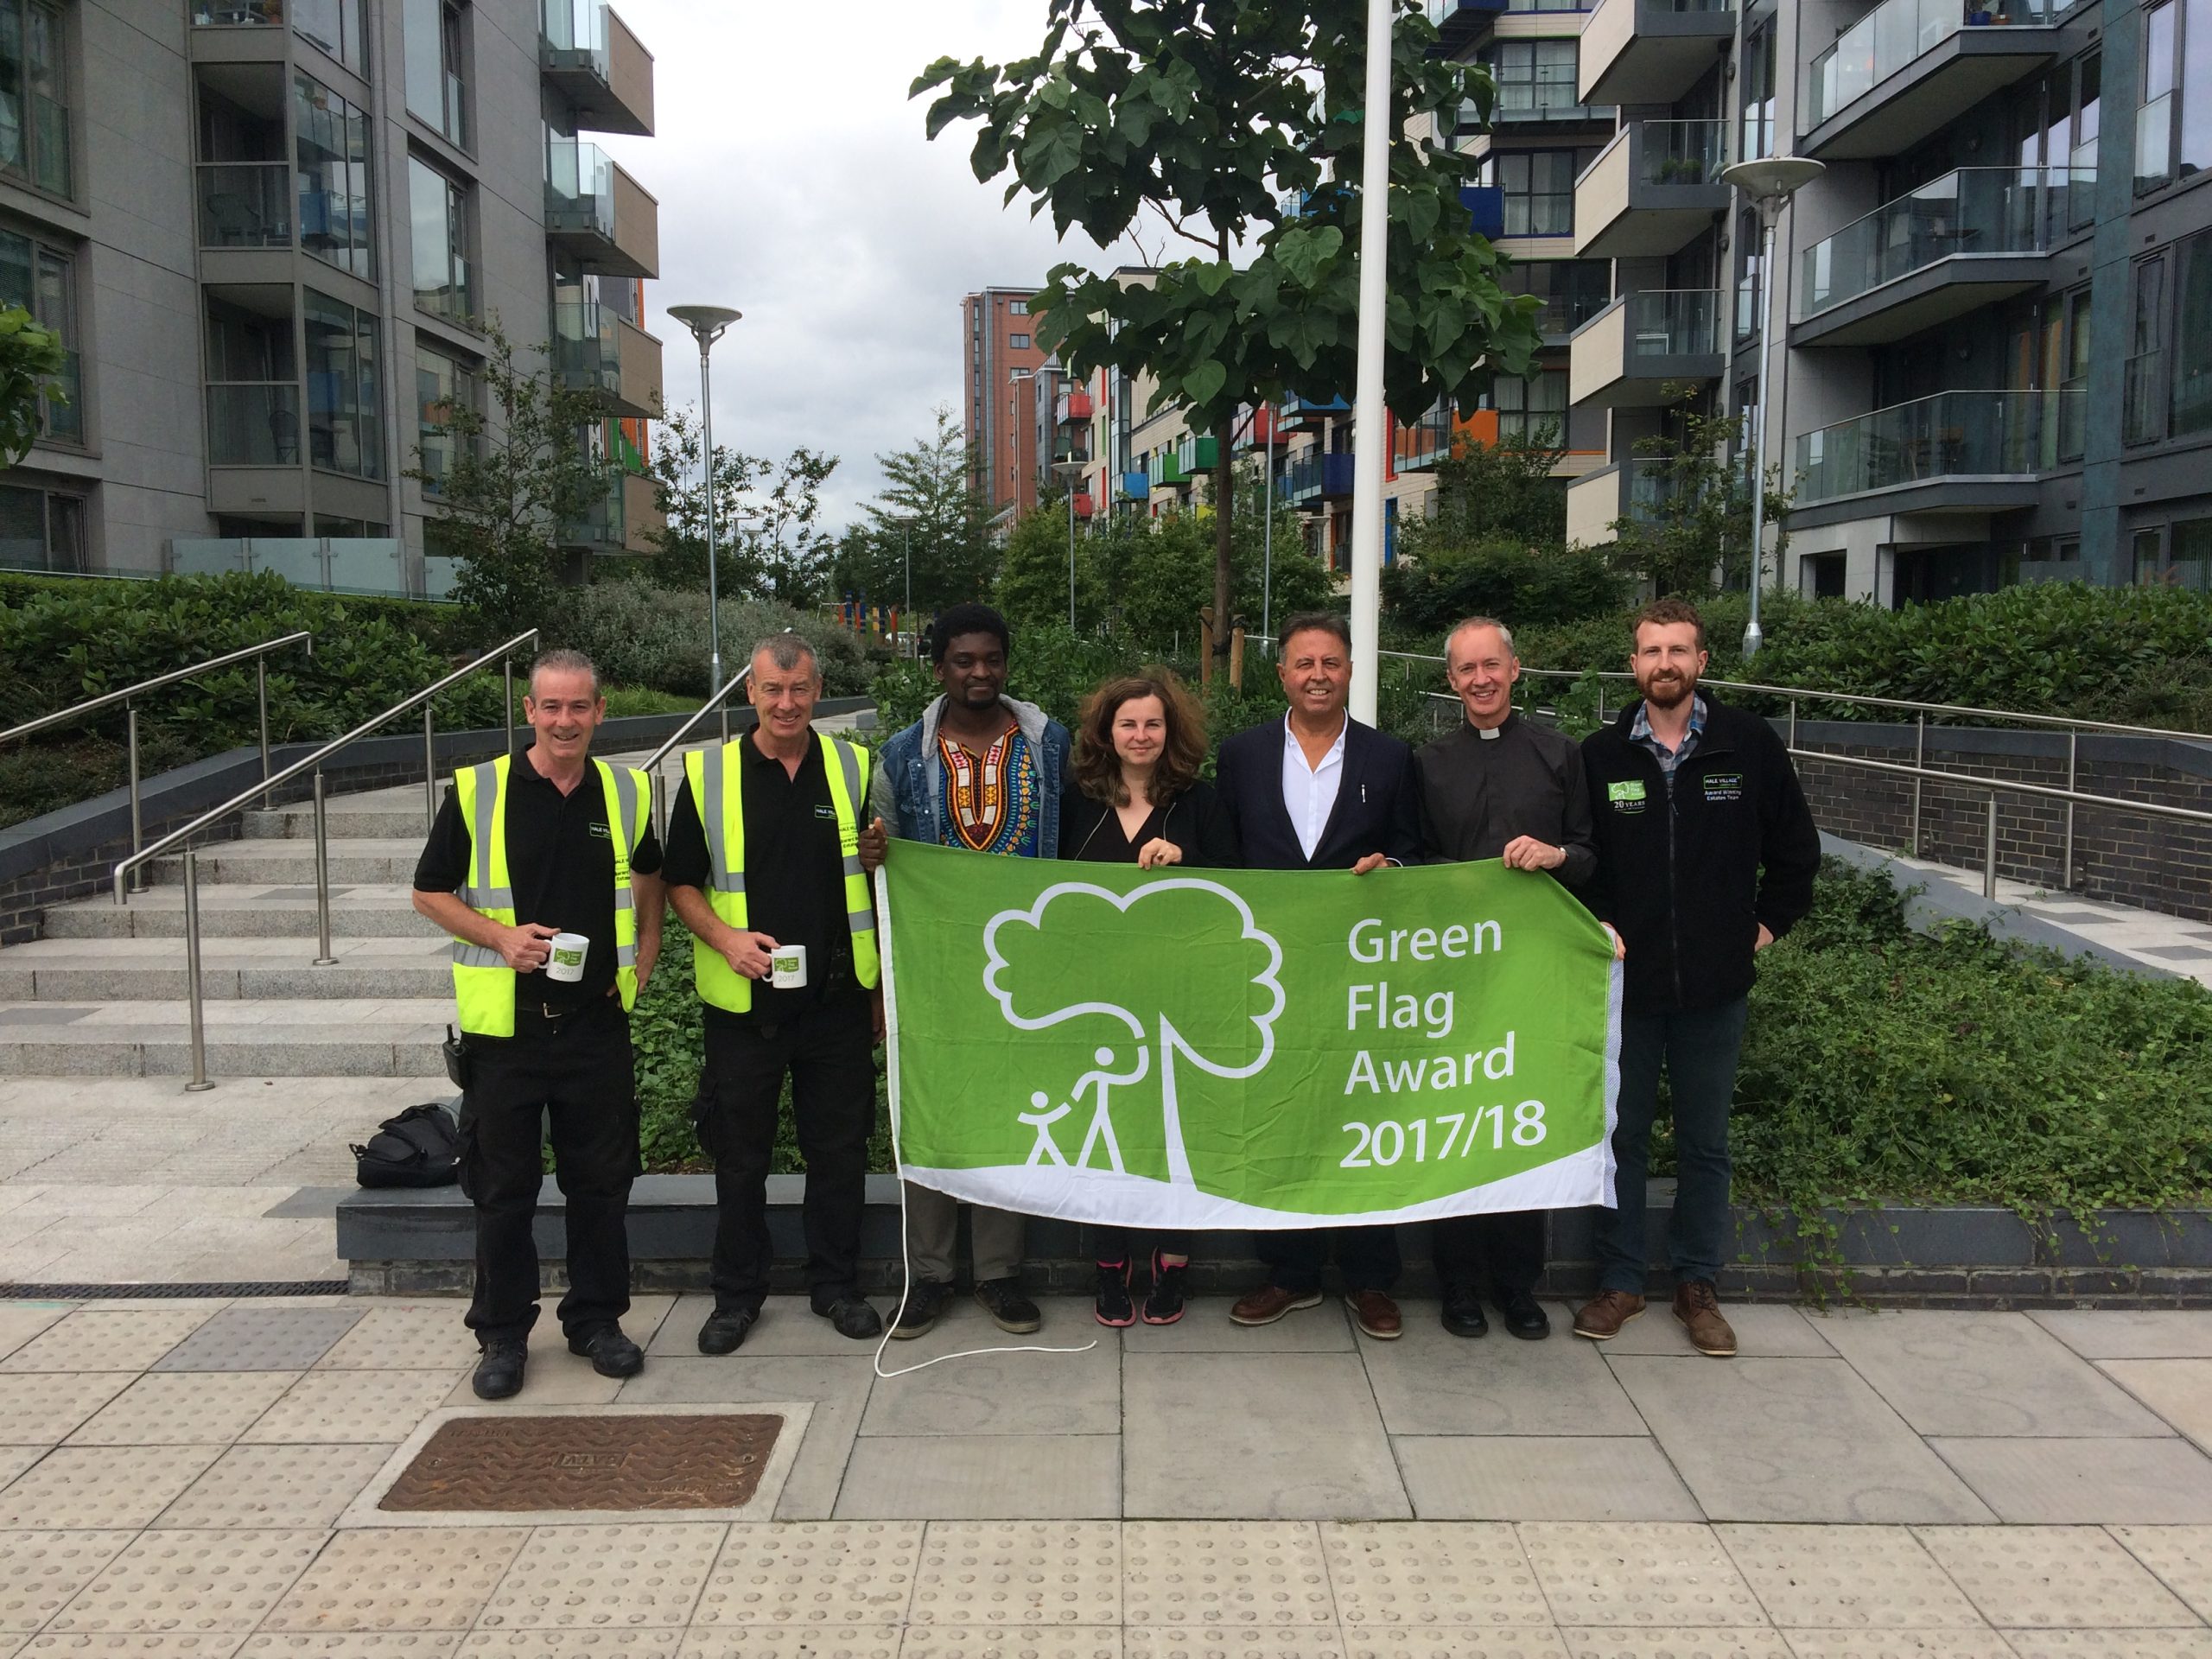 Hale Village awarded Green Flag for second year!